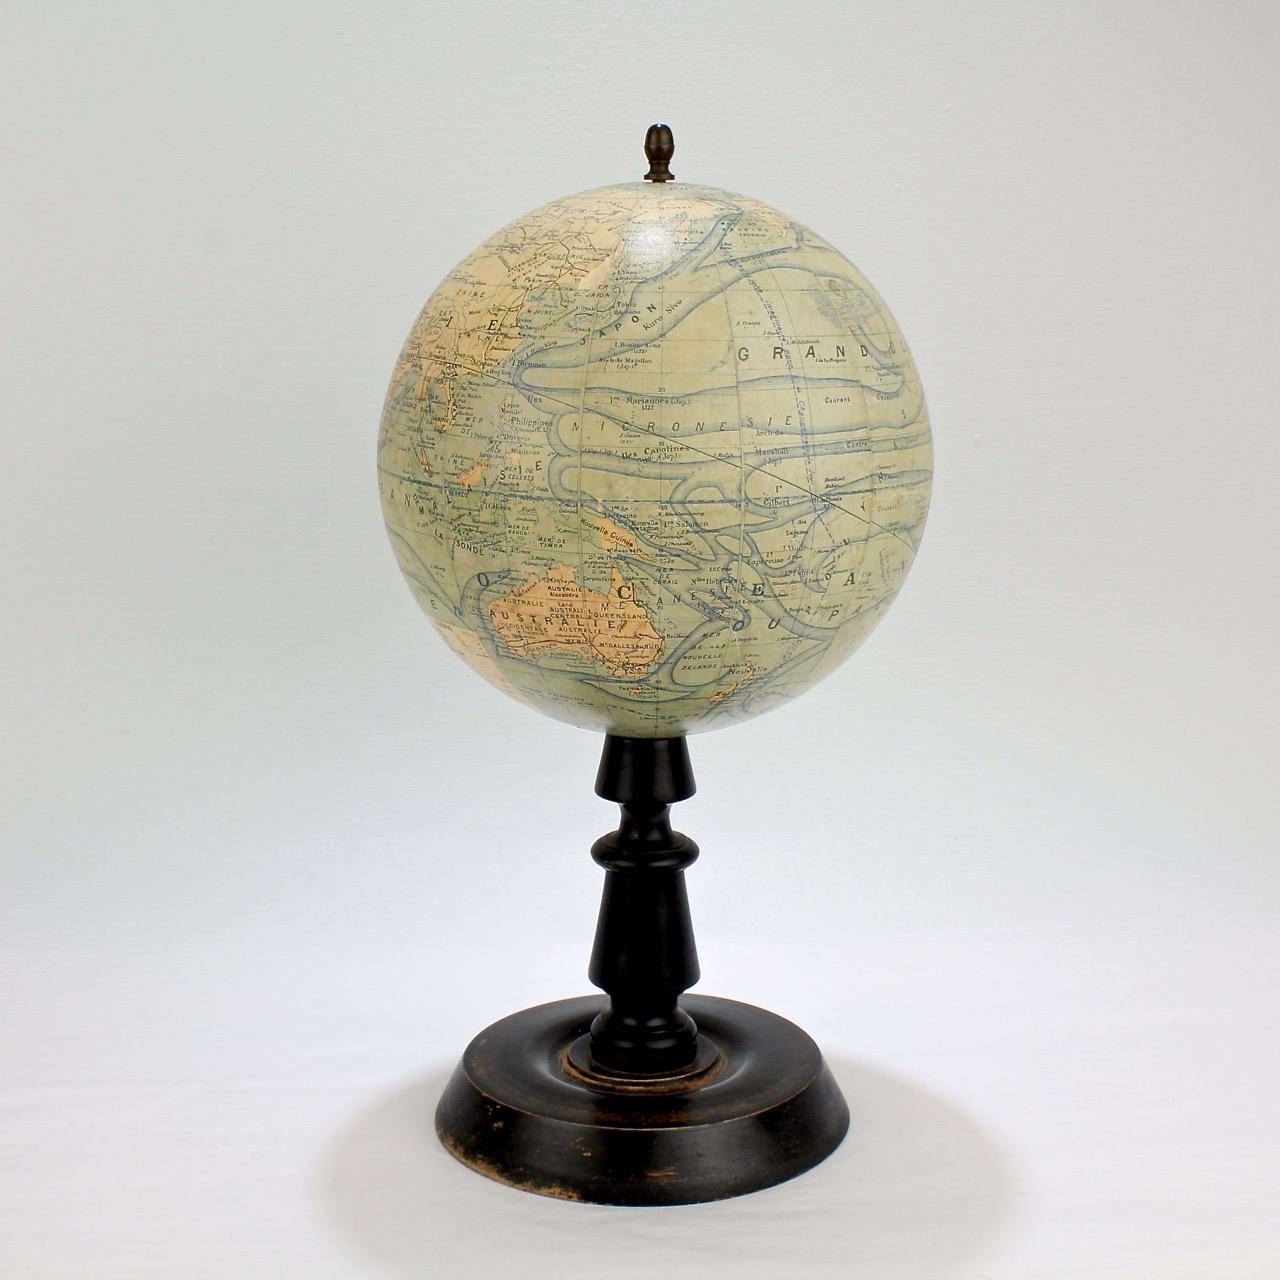 20th Century Antique French Terrestrial Globe on Wooden Stand by J. Forest of Paris